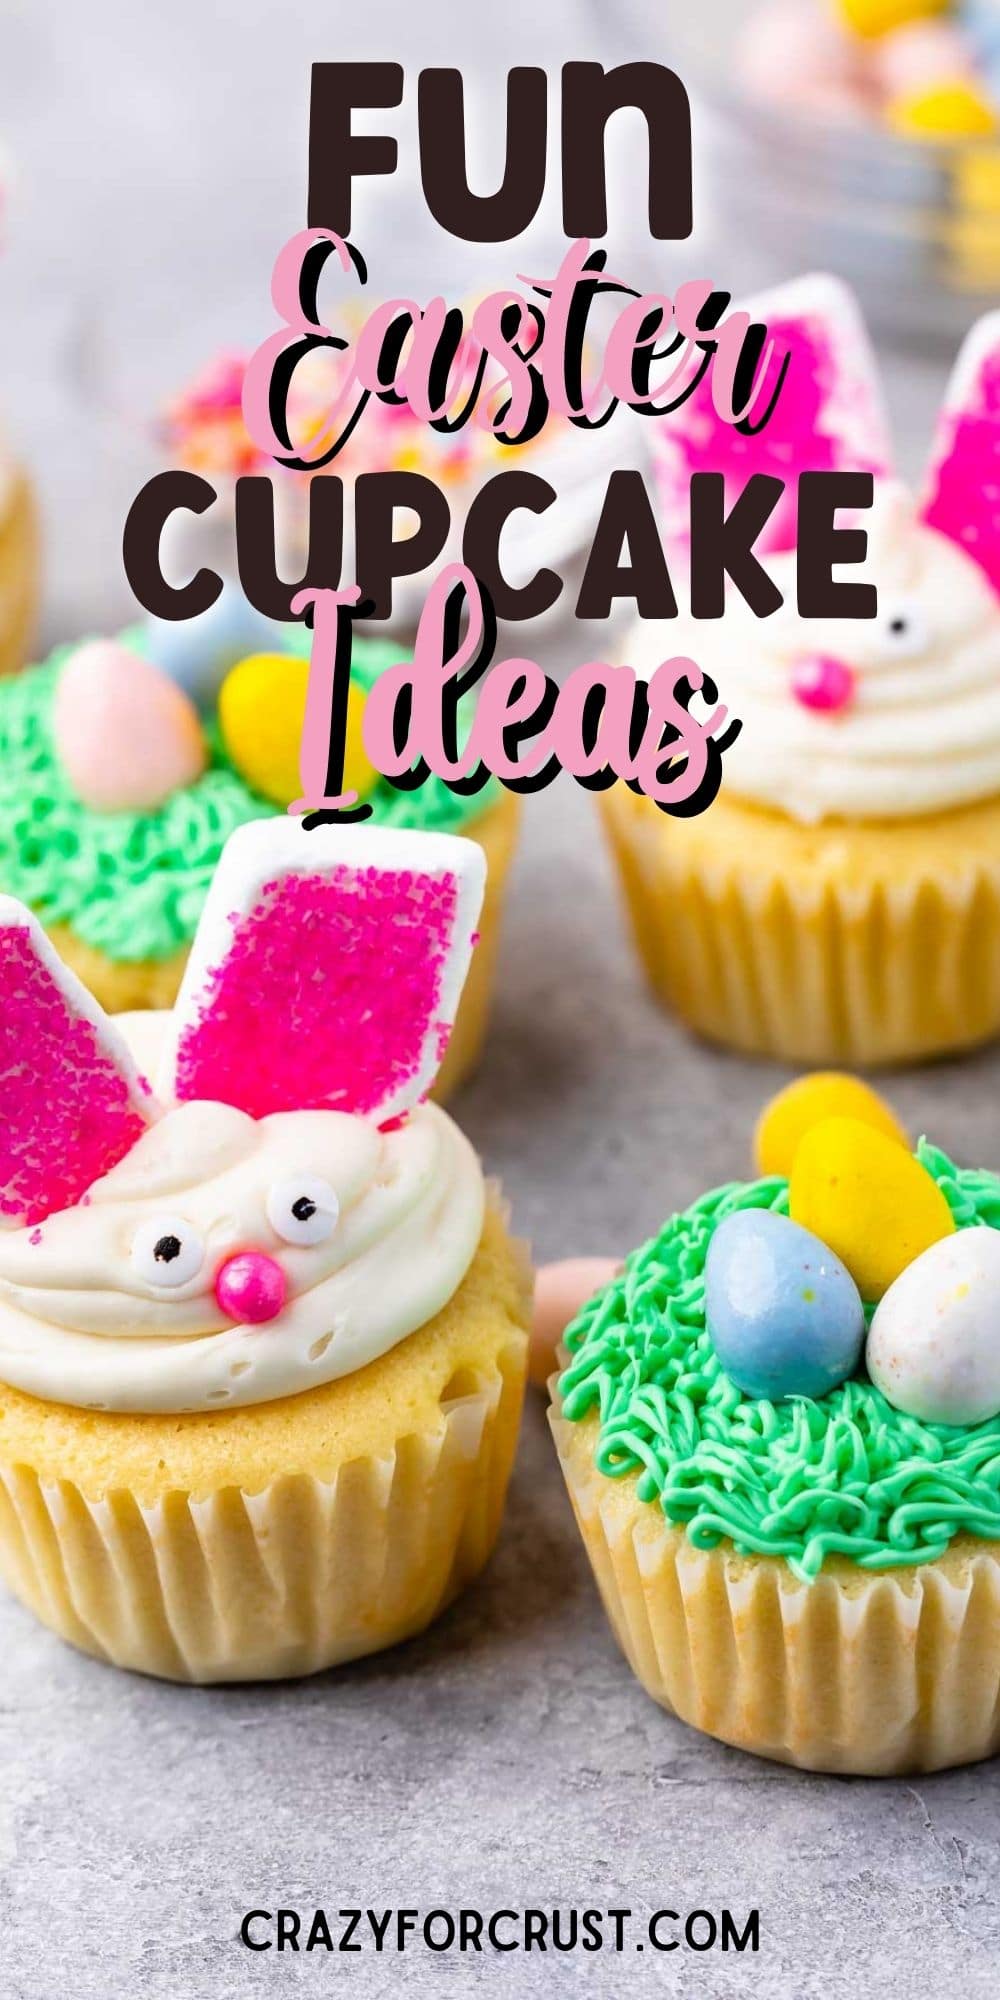 Easter nest and bunny cupcakes with recipe title on top of image